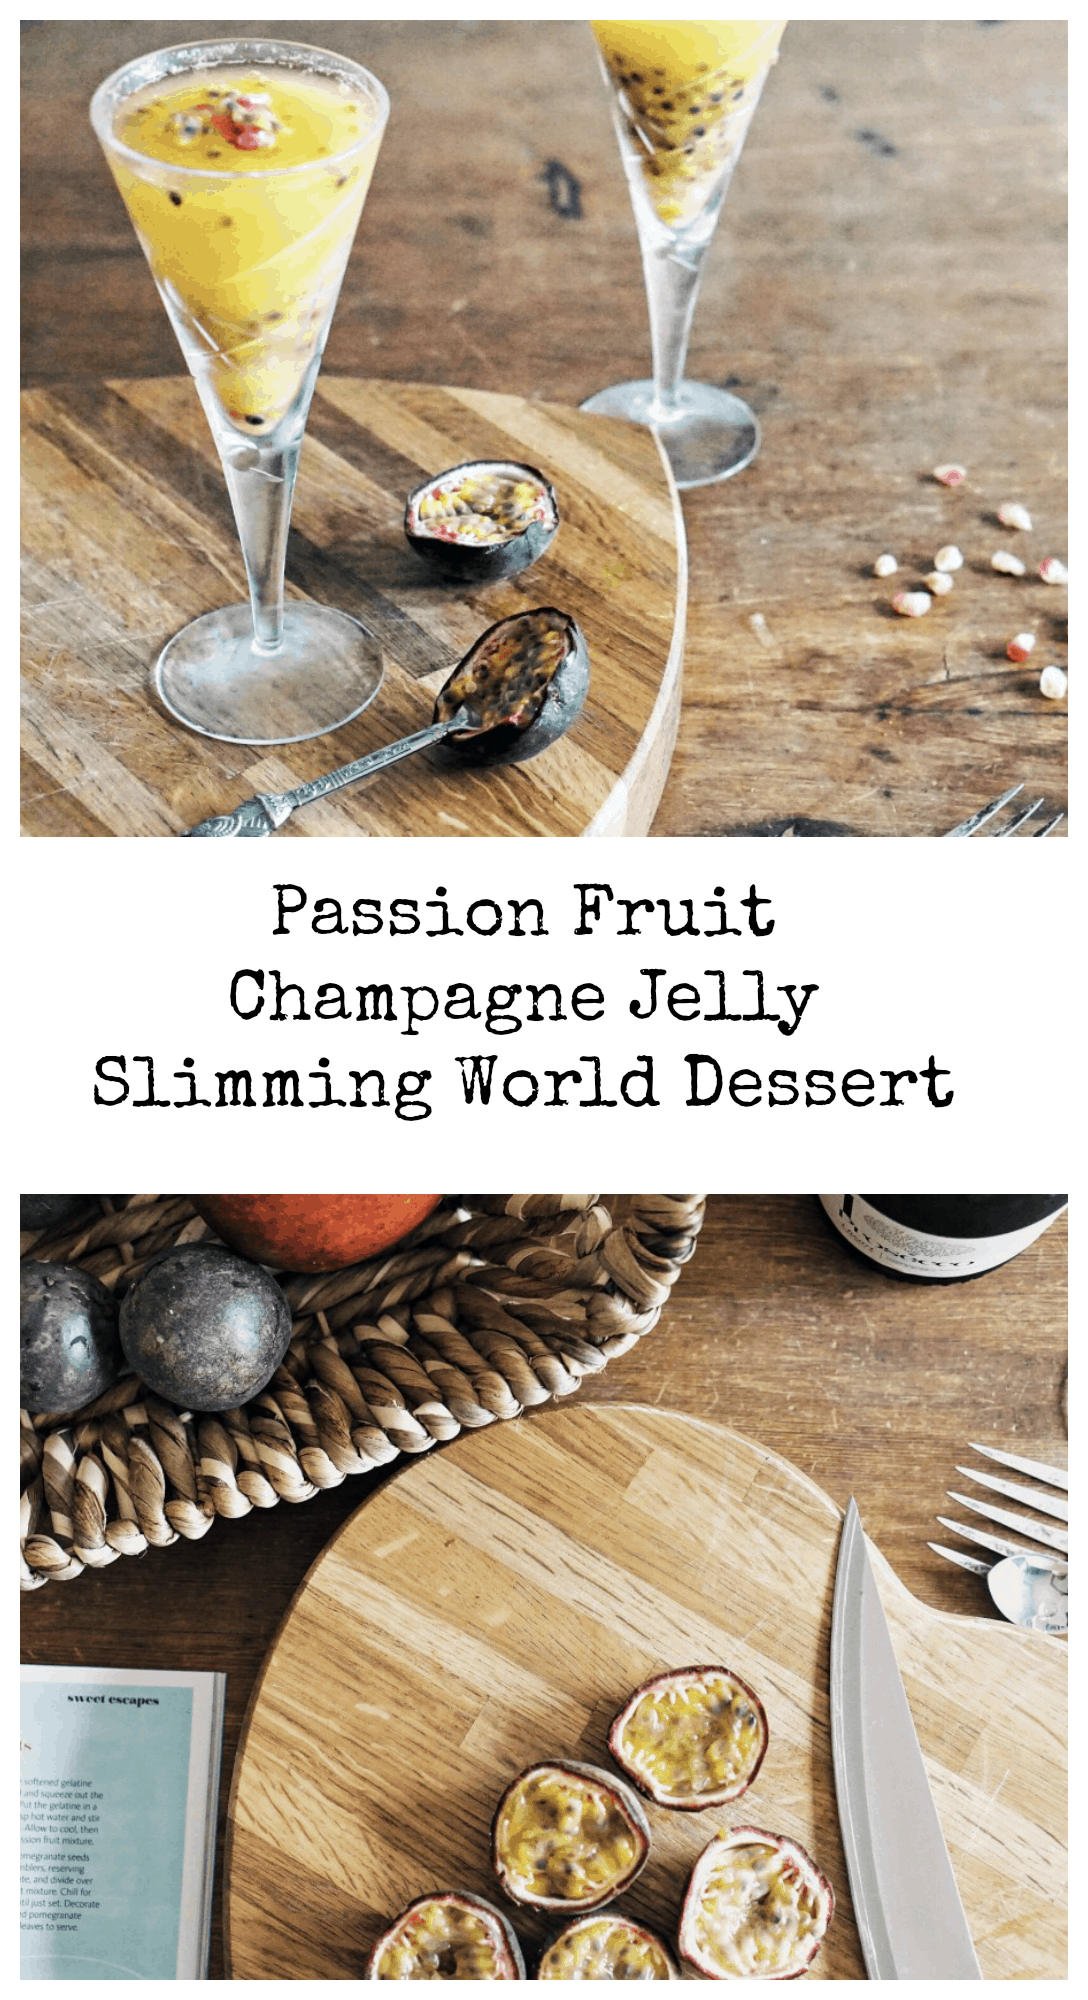 Passion Fruit Champagne Jelly, Slimming World Dessert an easy to make low fat dessert perfect for summer BBQs and dinner parties.